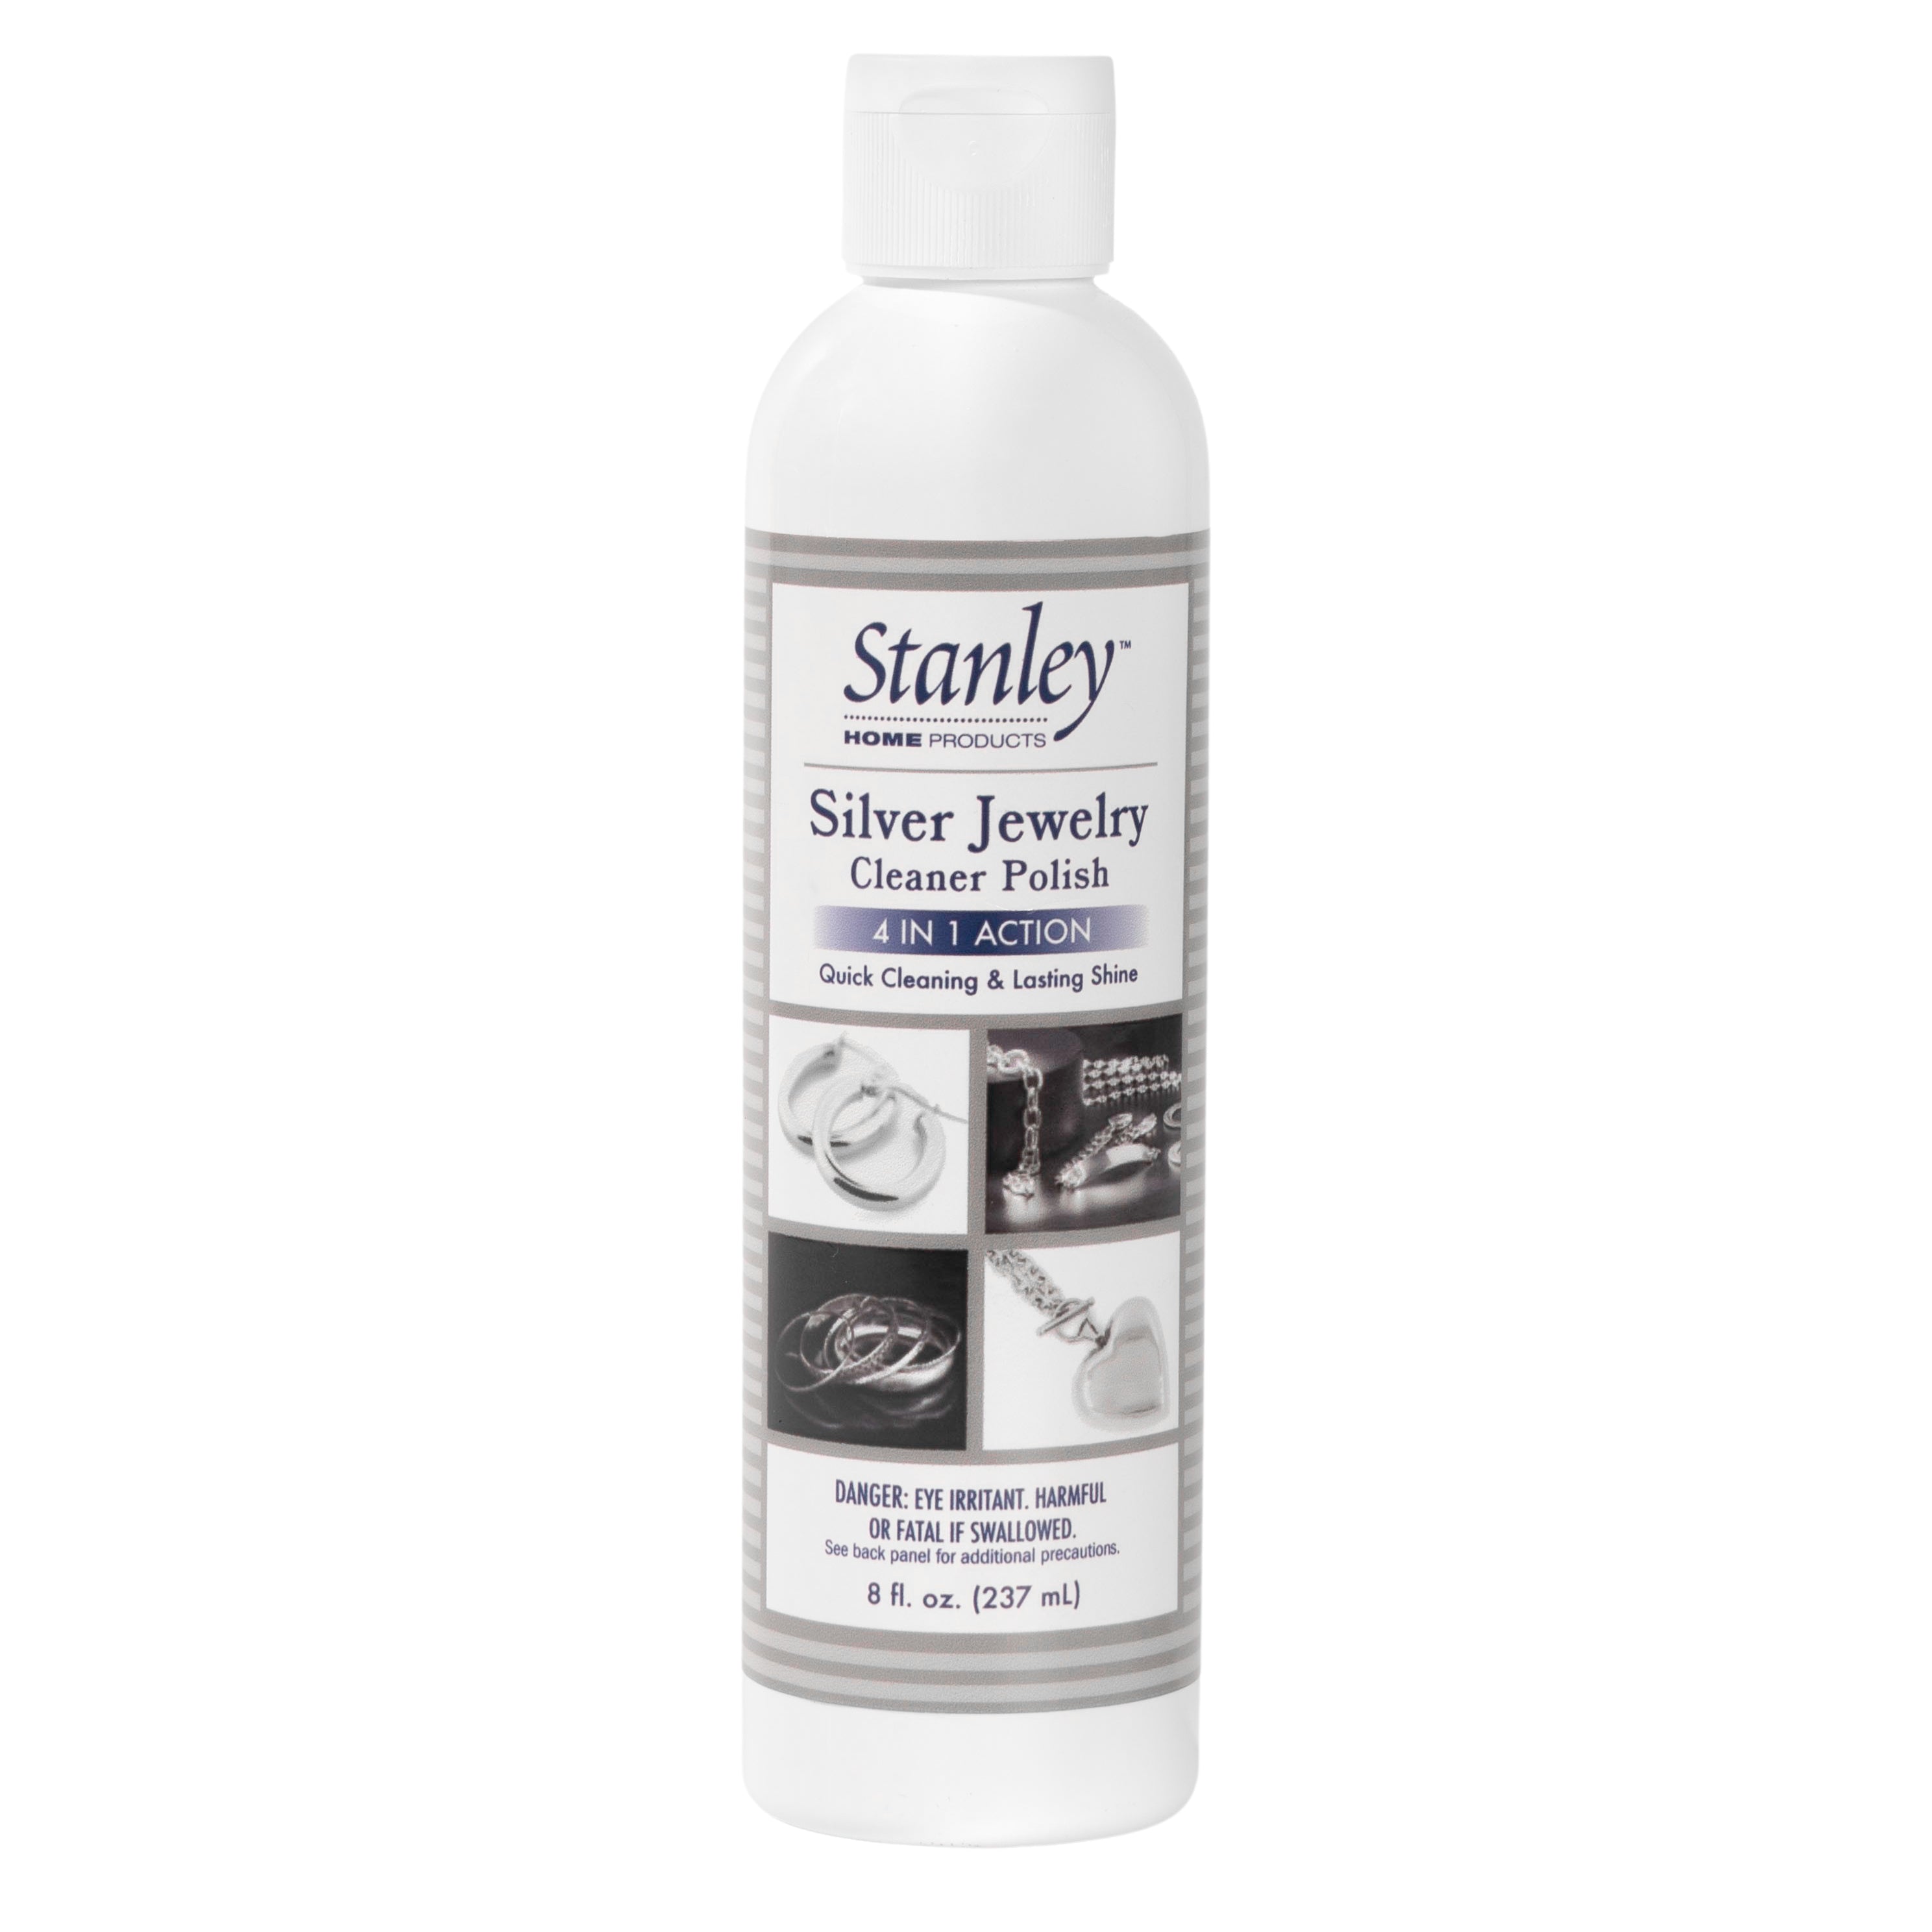 Stanley Silver Jewelry Cleaner Polish - jewelry cleaner — Fuller Brush  Company